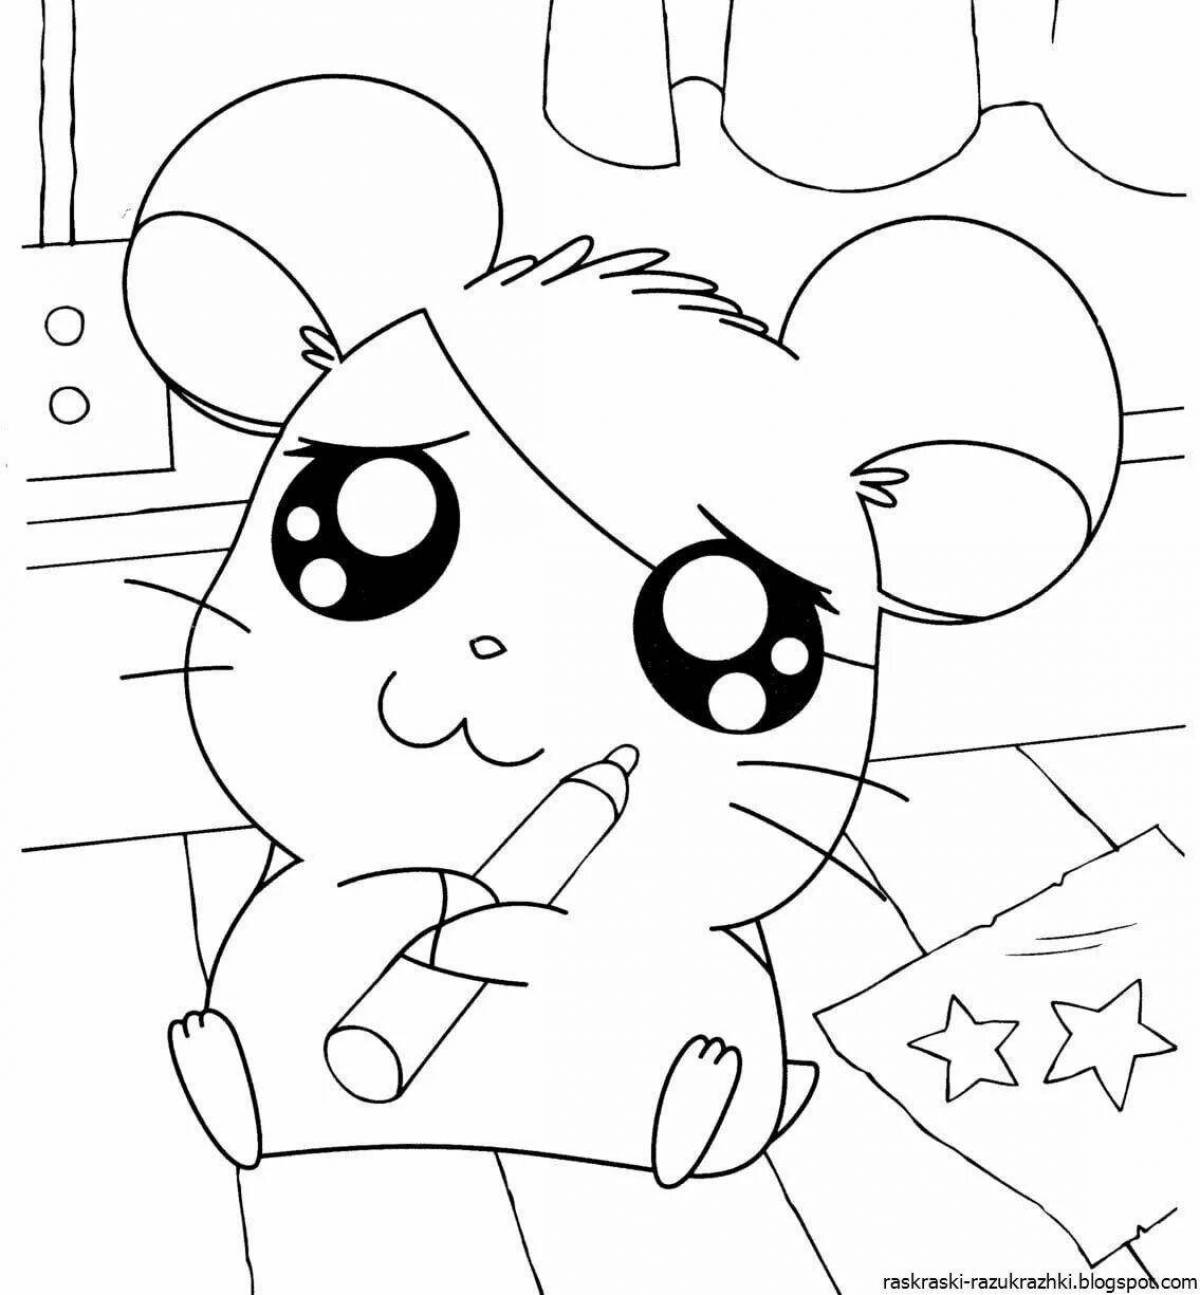 Fancy anime cat coloring book